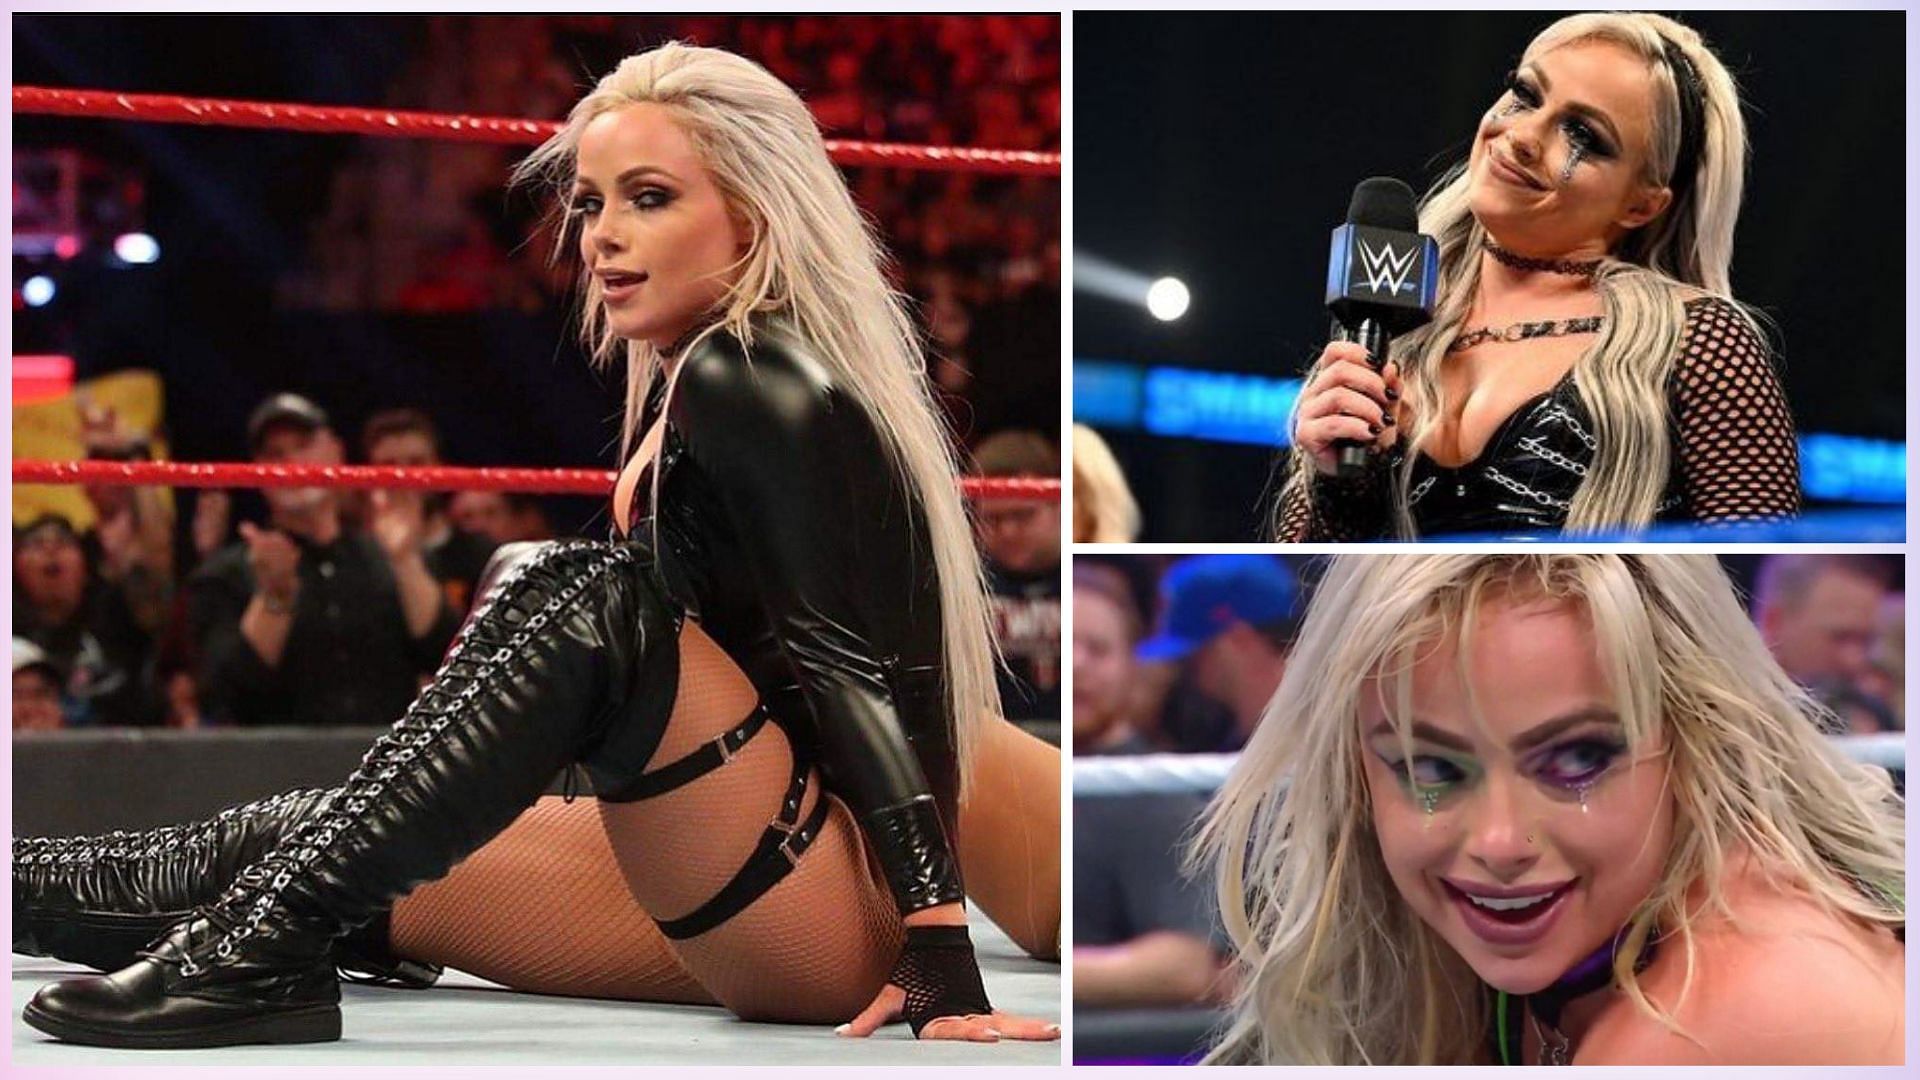 Liv Morgan has embraced the dark side since Extreme Rules loss.